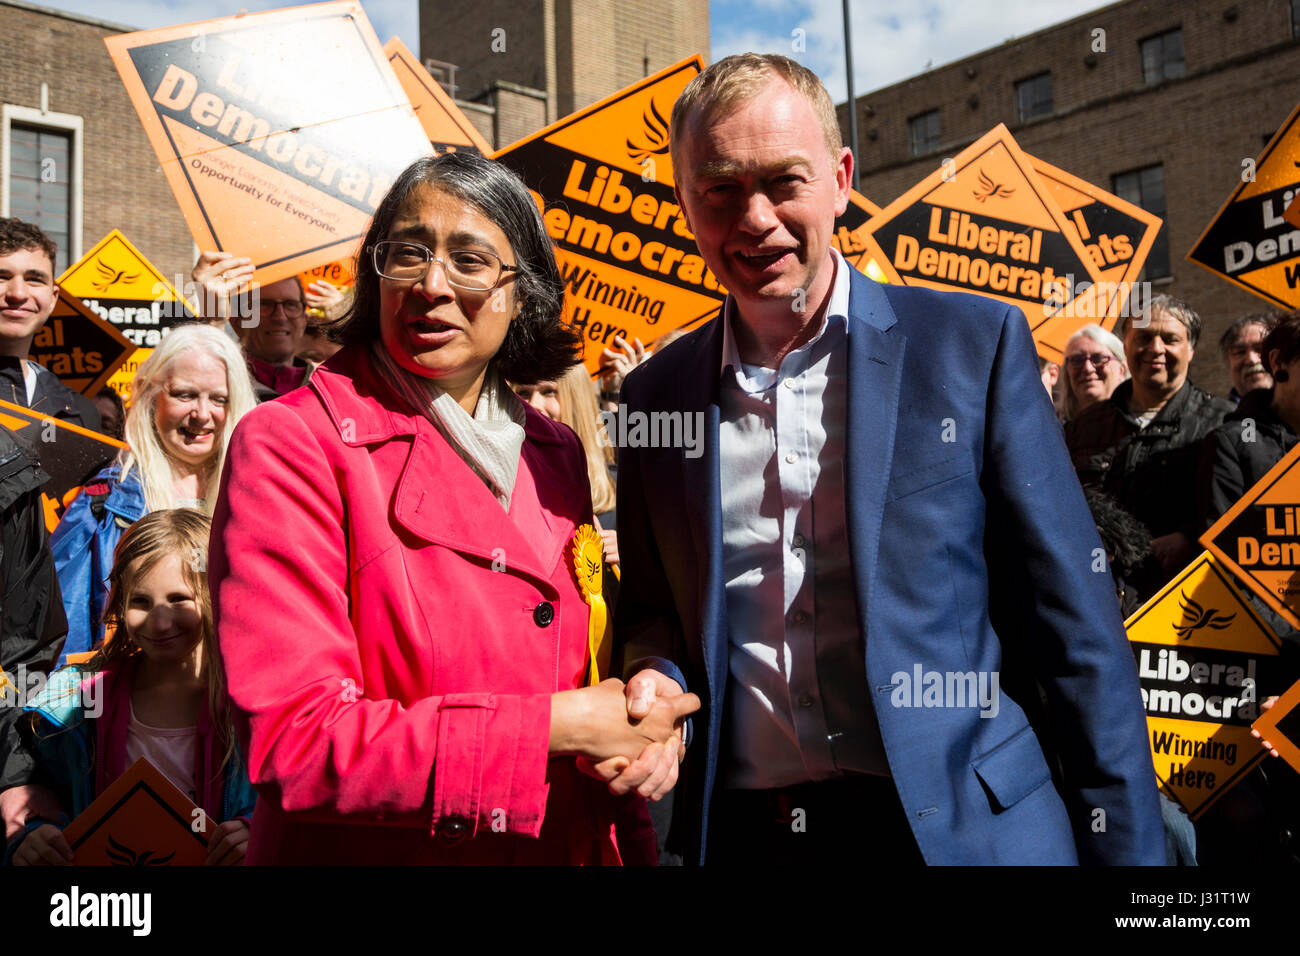 London, UK. 1st May, 2017. Marisha Ray, Lib Dem candidate for Chipping Barnet. Tim Farron, Leader of the Liberal Democrats is campaigning alongside North London candidates for the General Election at Hornsey Town Hall in Crouch End. Credit: Vibrant Pictures/Alamy Live News Stock Photo